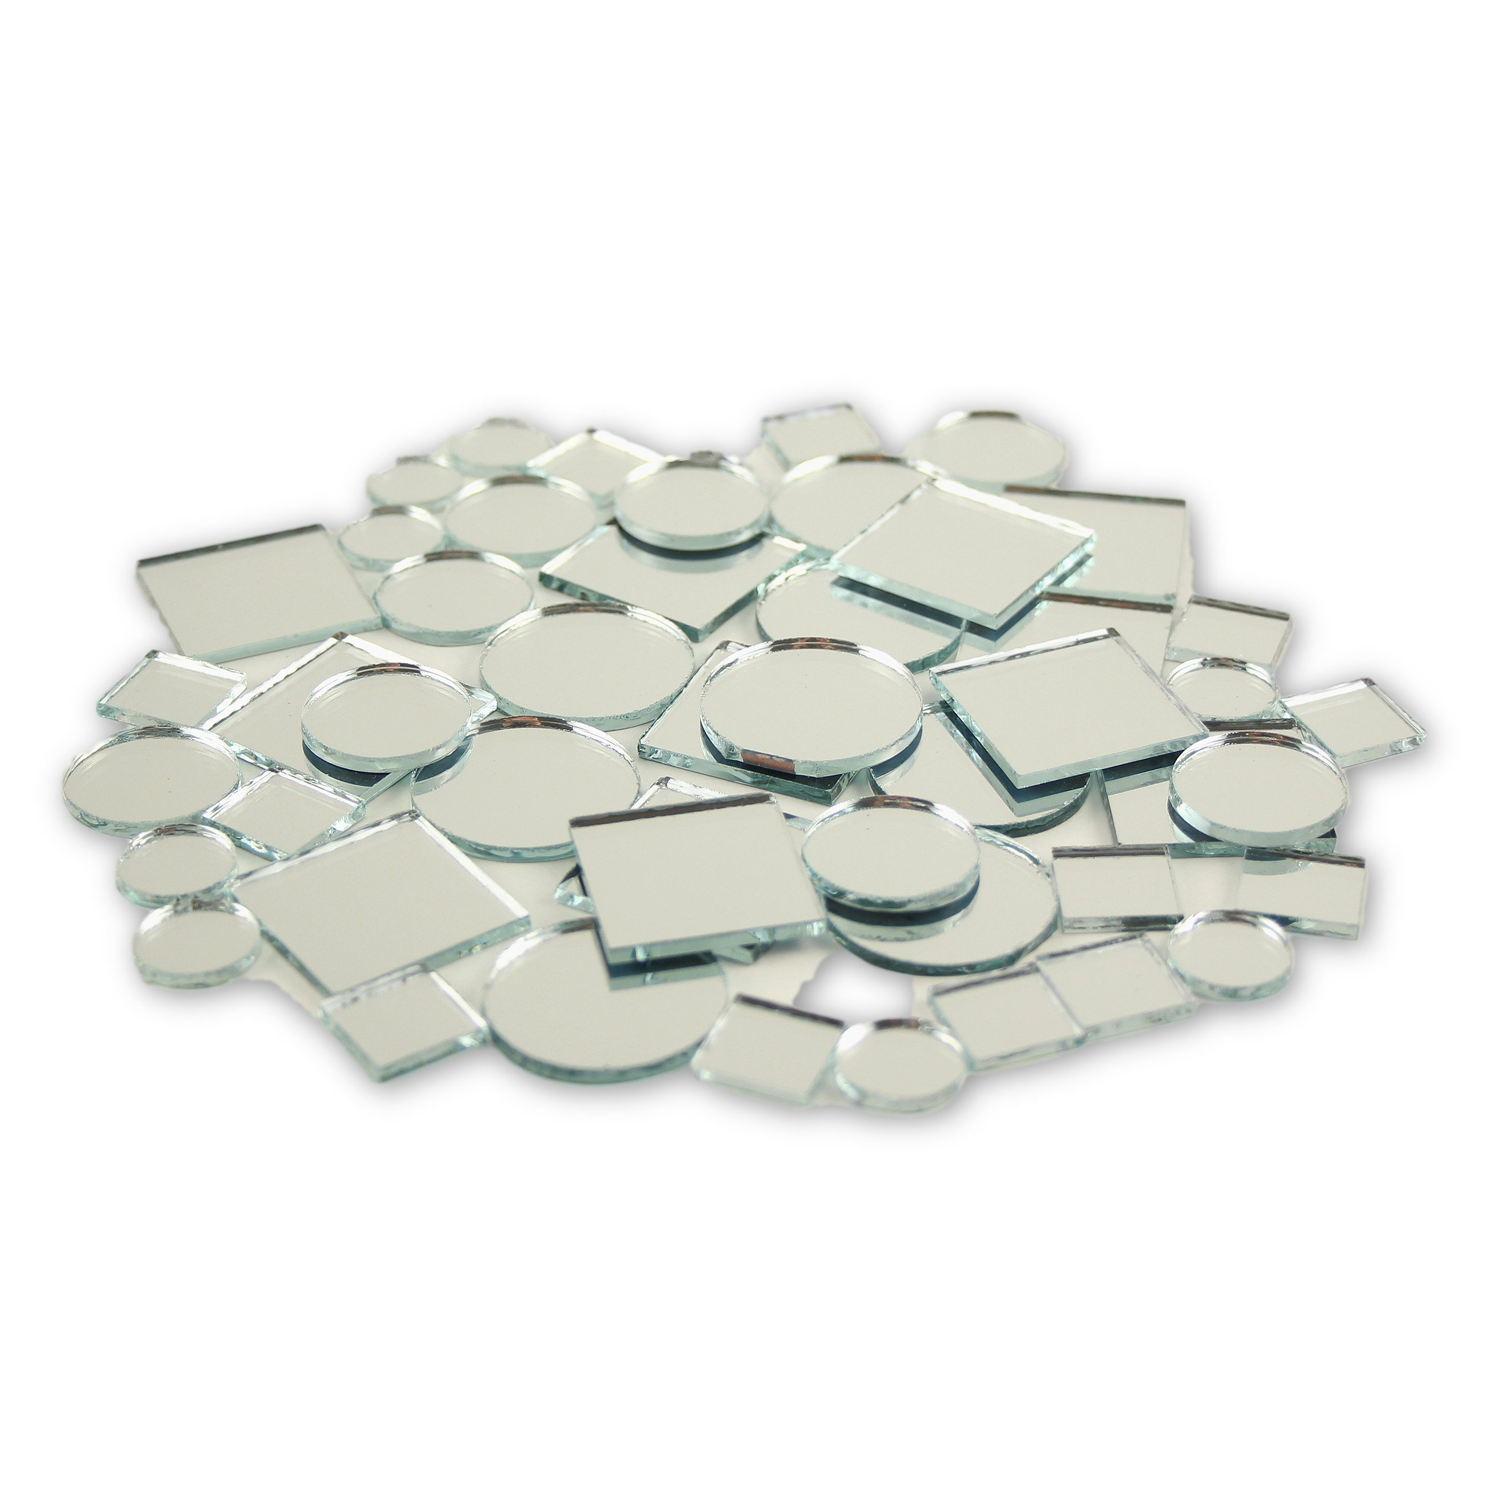 http://www.artcove.com/images/detailed/11/Small_Mini_Square___Round_Craft_Mirrors_Assorted_Sizes_Mirror_Mosaic_Tiles_0.5-1_inch_100_Pieces.png